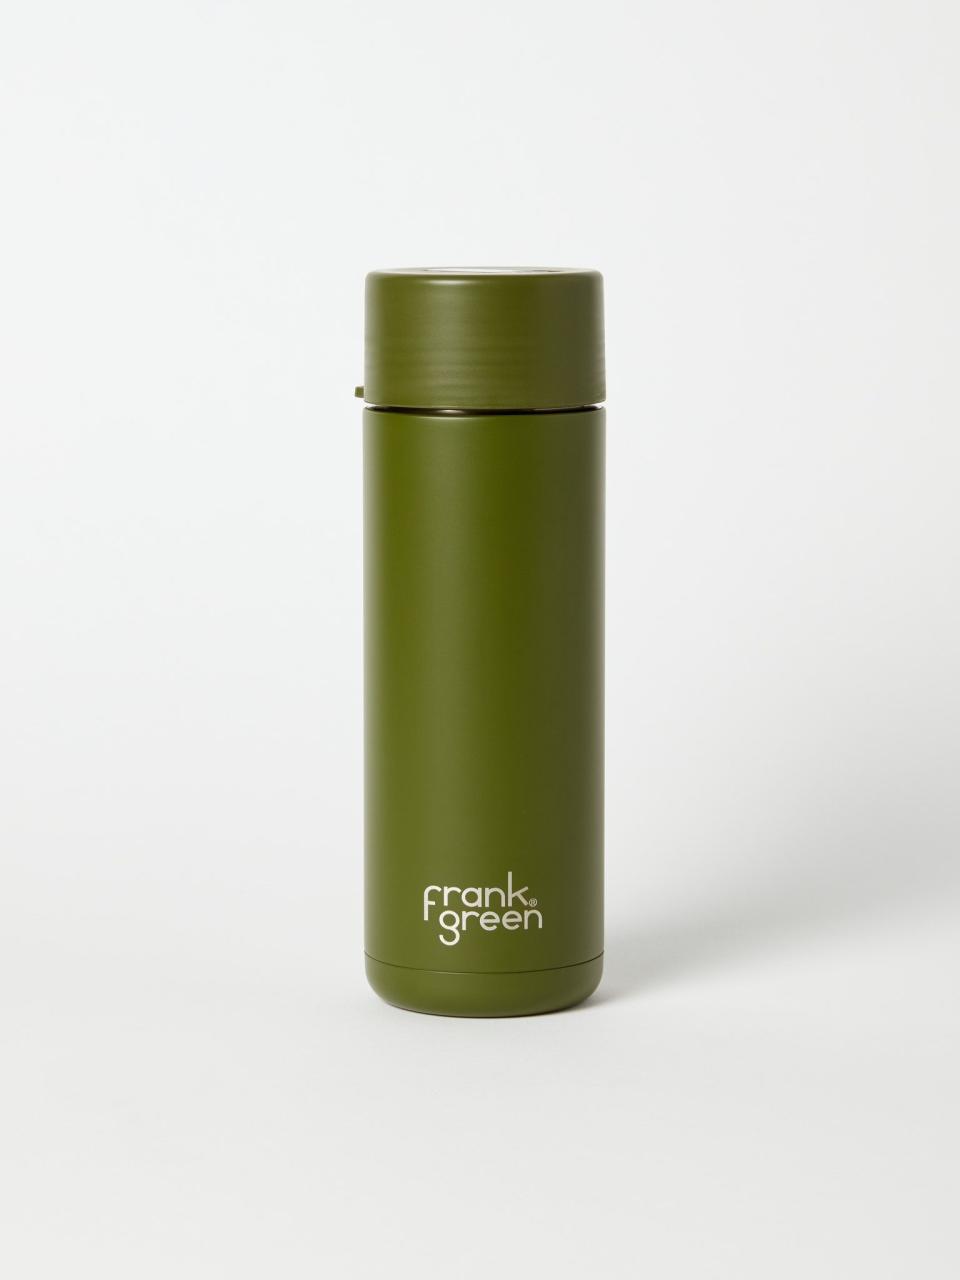 9) Ceramic Reusable Bottle with Straw Lid and Strap